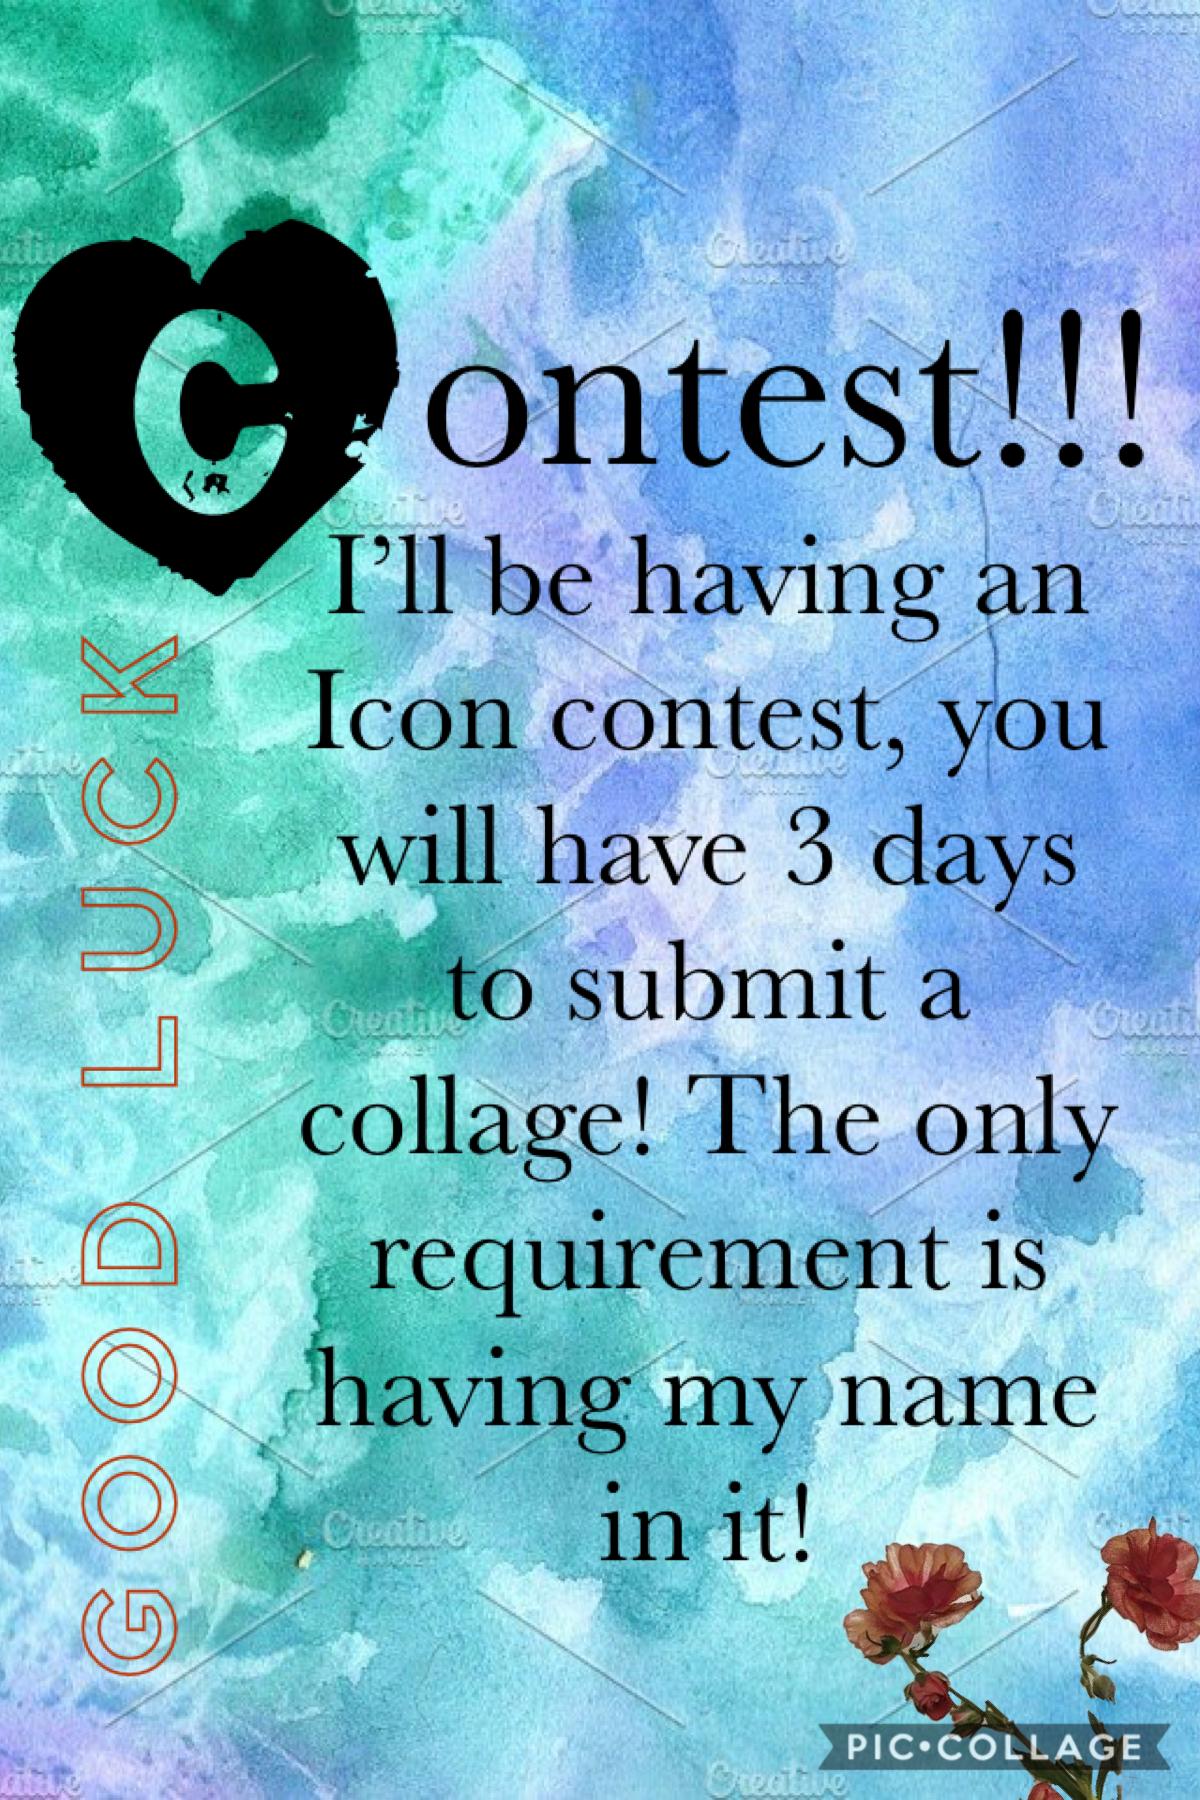 Submit in 3 days!! Good luck!